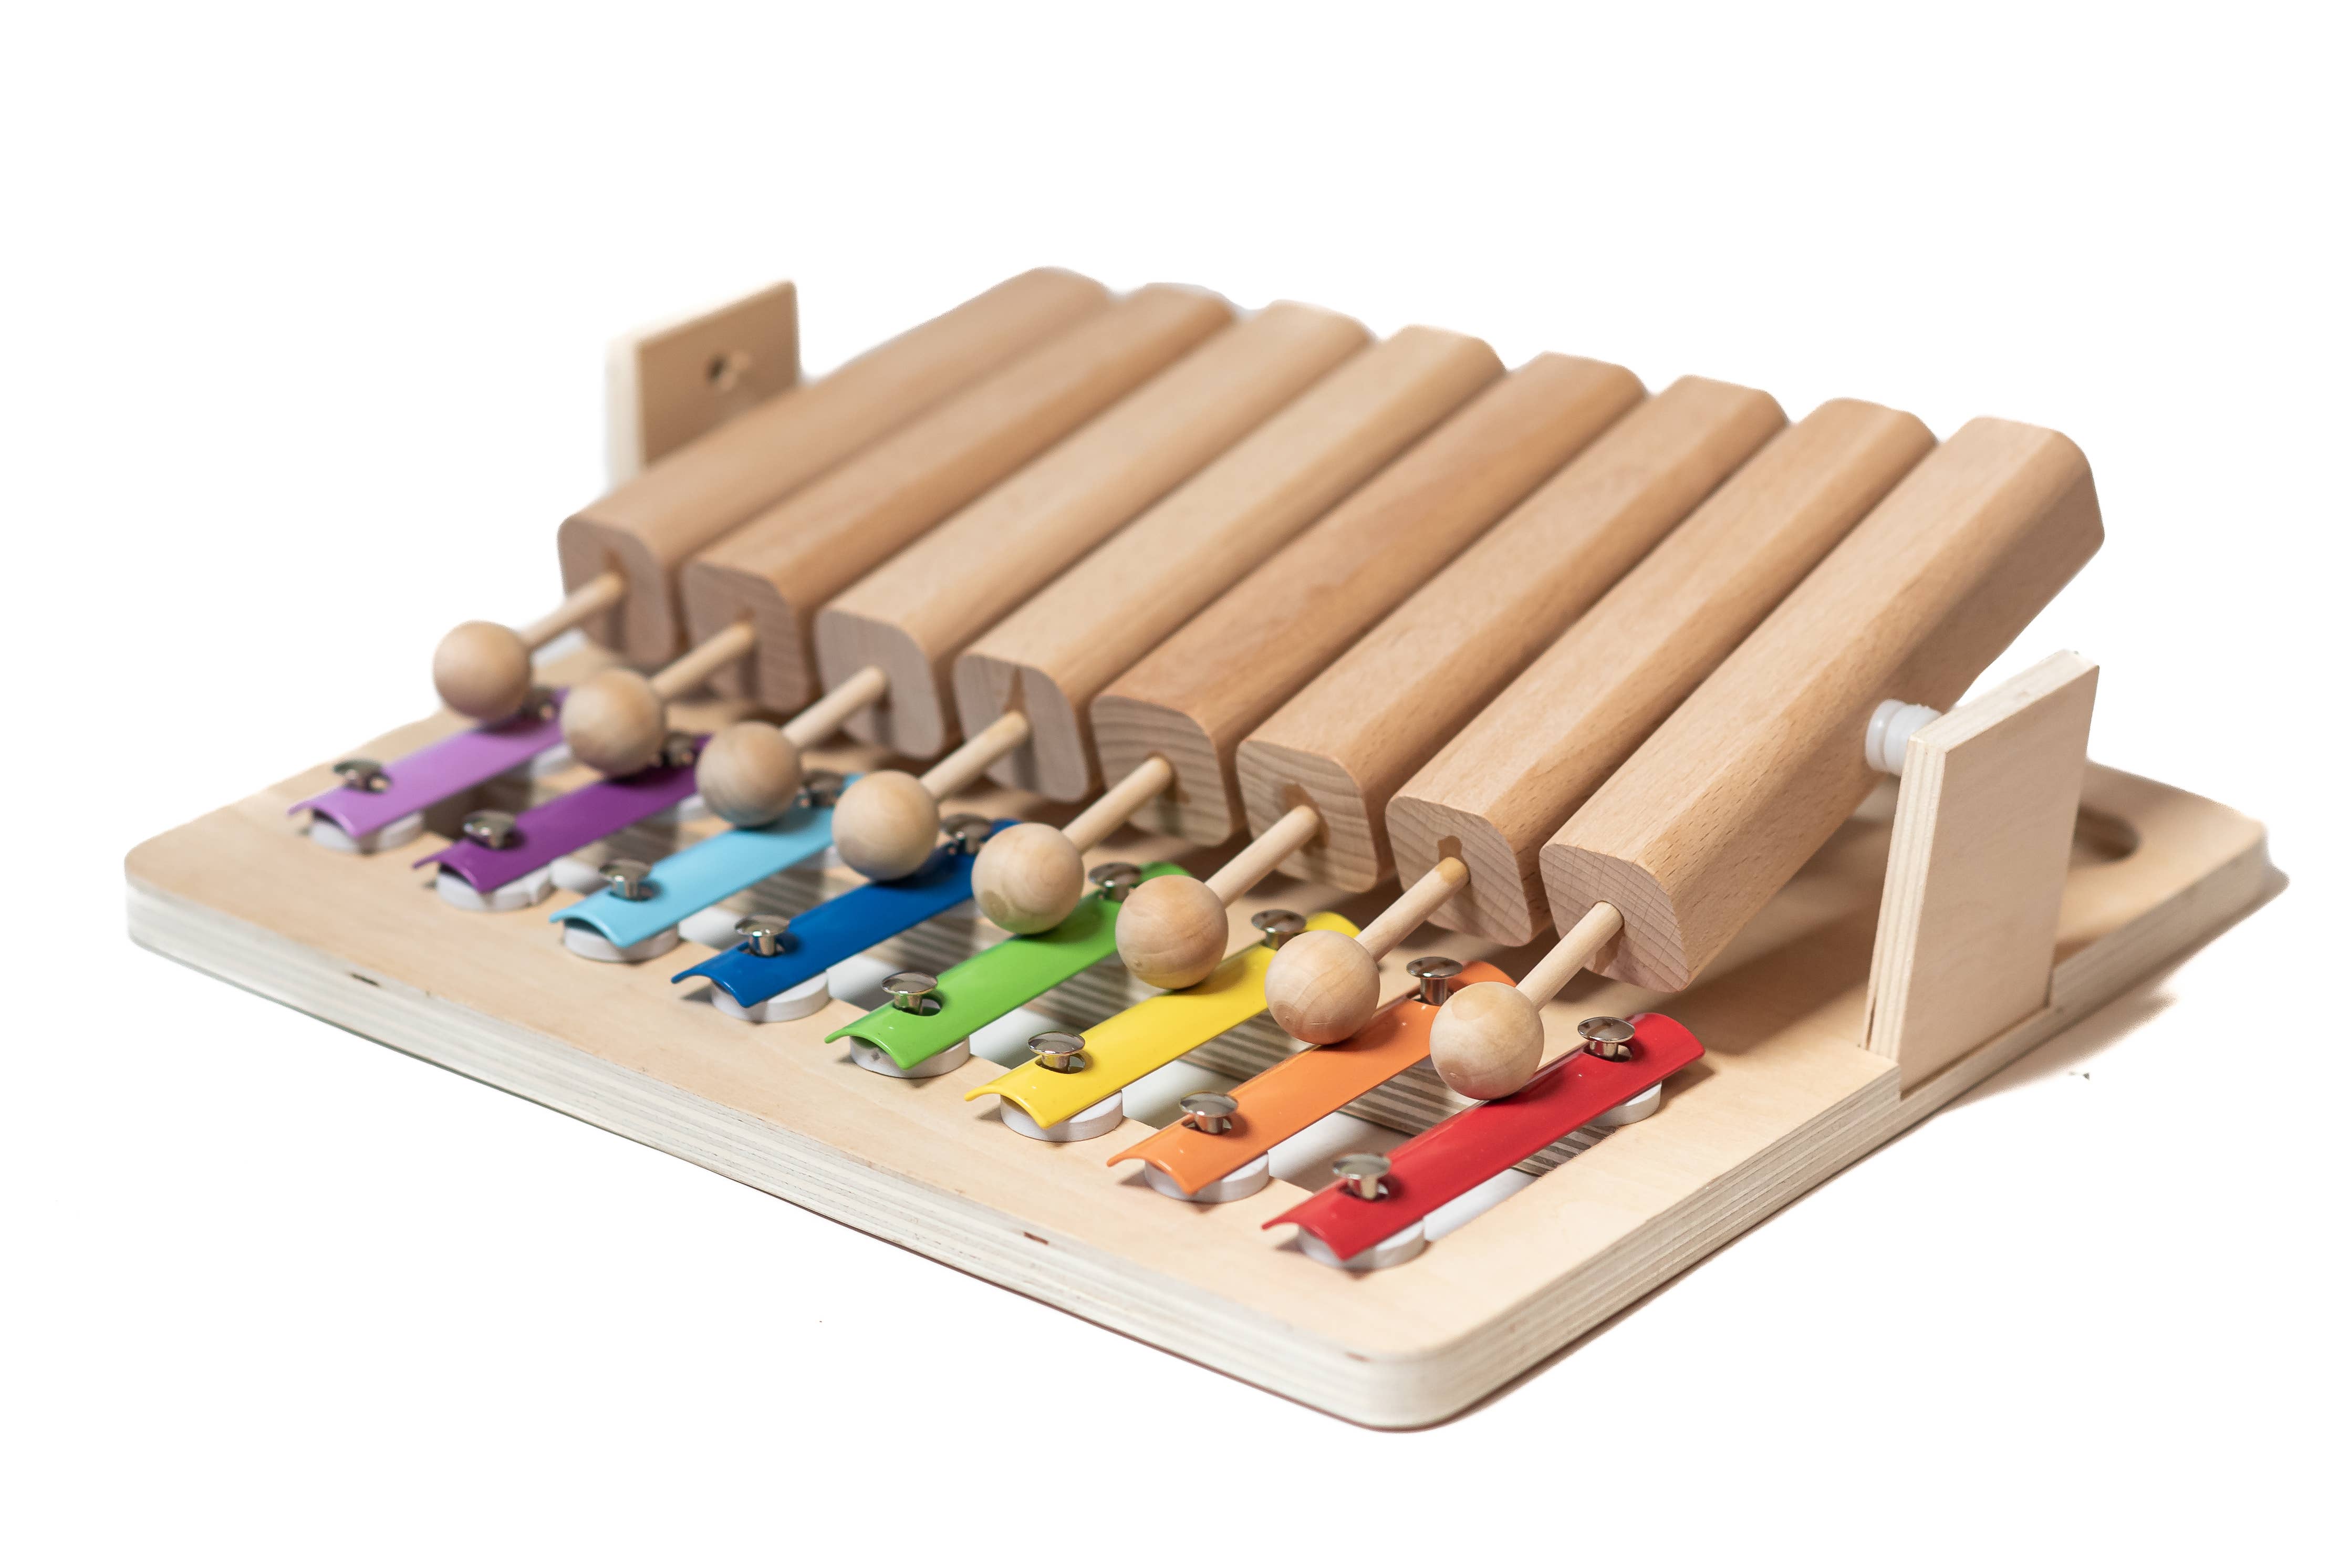 My Intelligent Pets - Pet's Piano - Interactive Toy Product of the Year